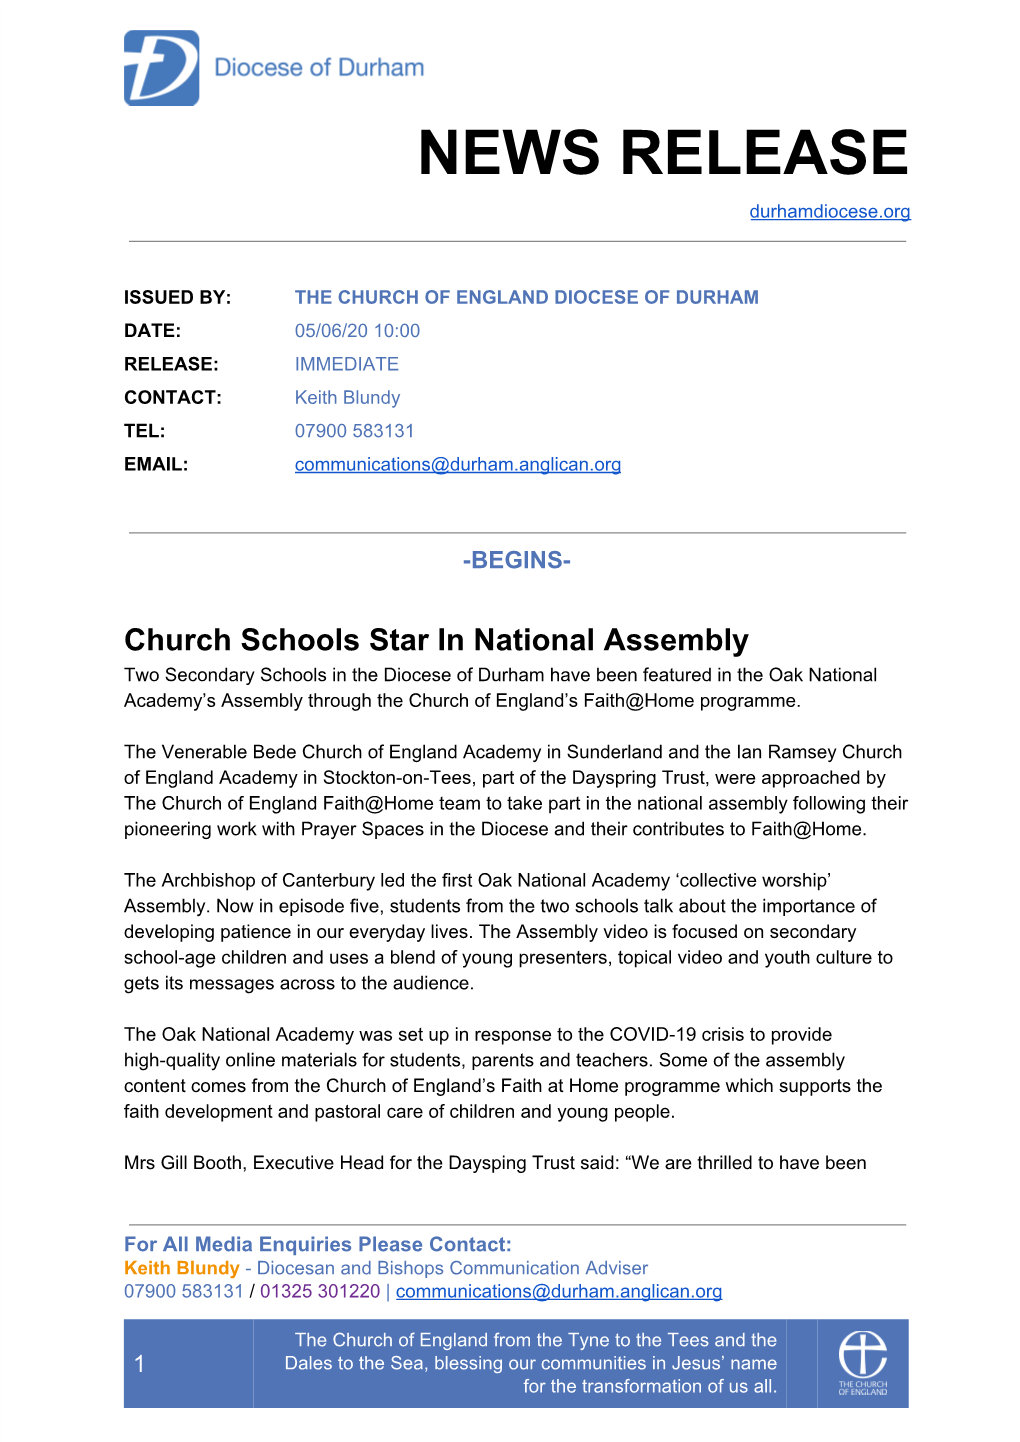 NEWS RELEASE Durhamdiocese.Org